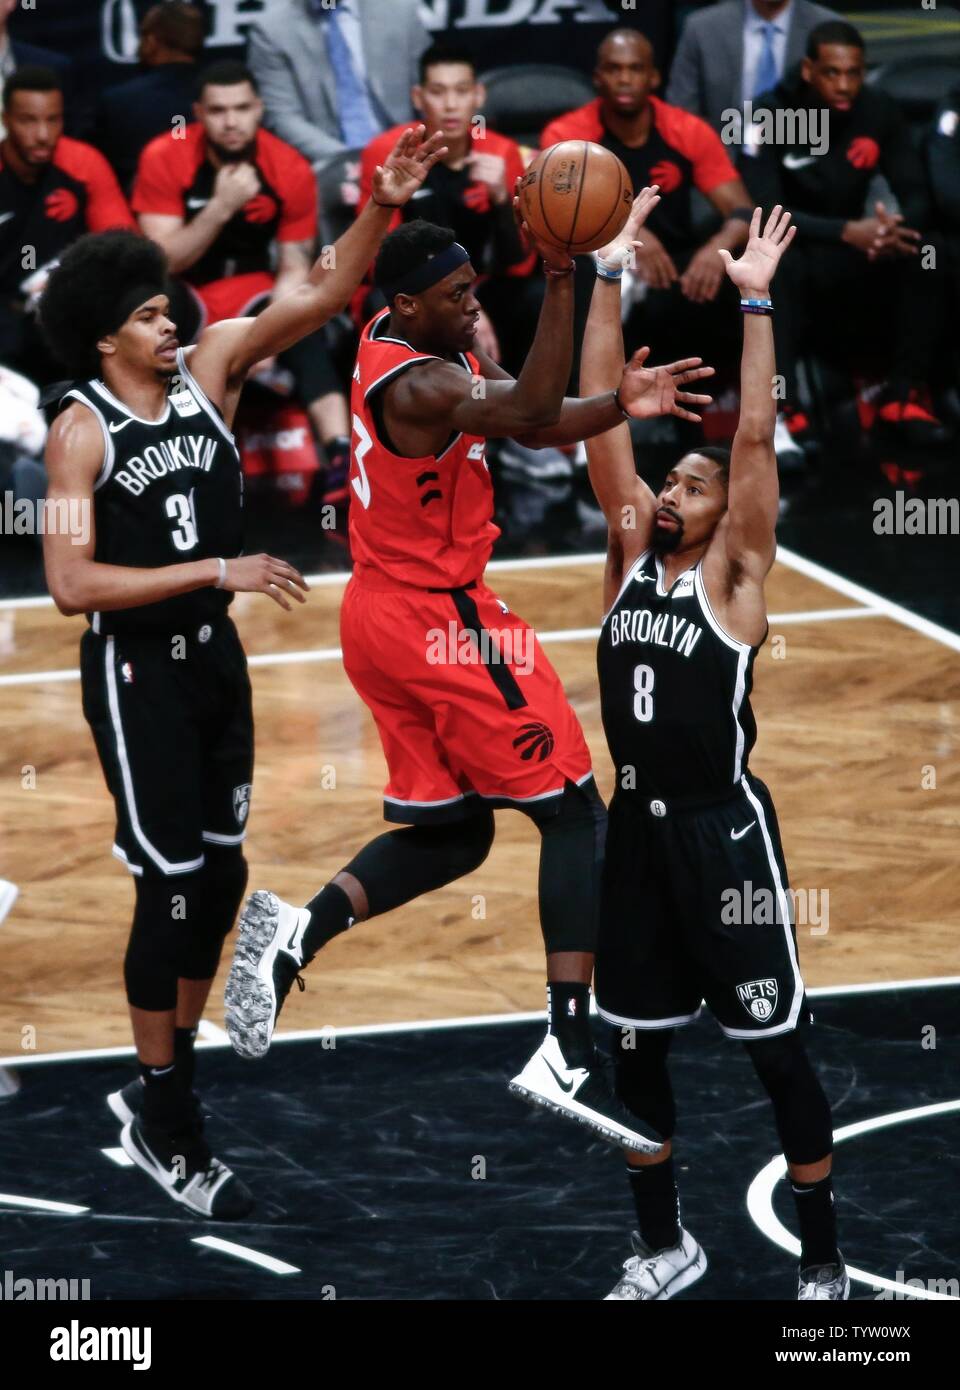 Toronto Raptors forward OG Anunoby (3) passes the ball against Brooklyn Nets center Jarrett Allen (31) and guard Spencer Dinwiddie (8) in the first half at Barclays Center in New York City on April 3, 2019.       Photo by Nicole Sweet/UPI Stock Photo